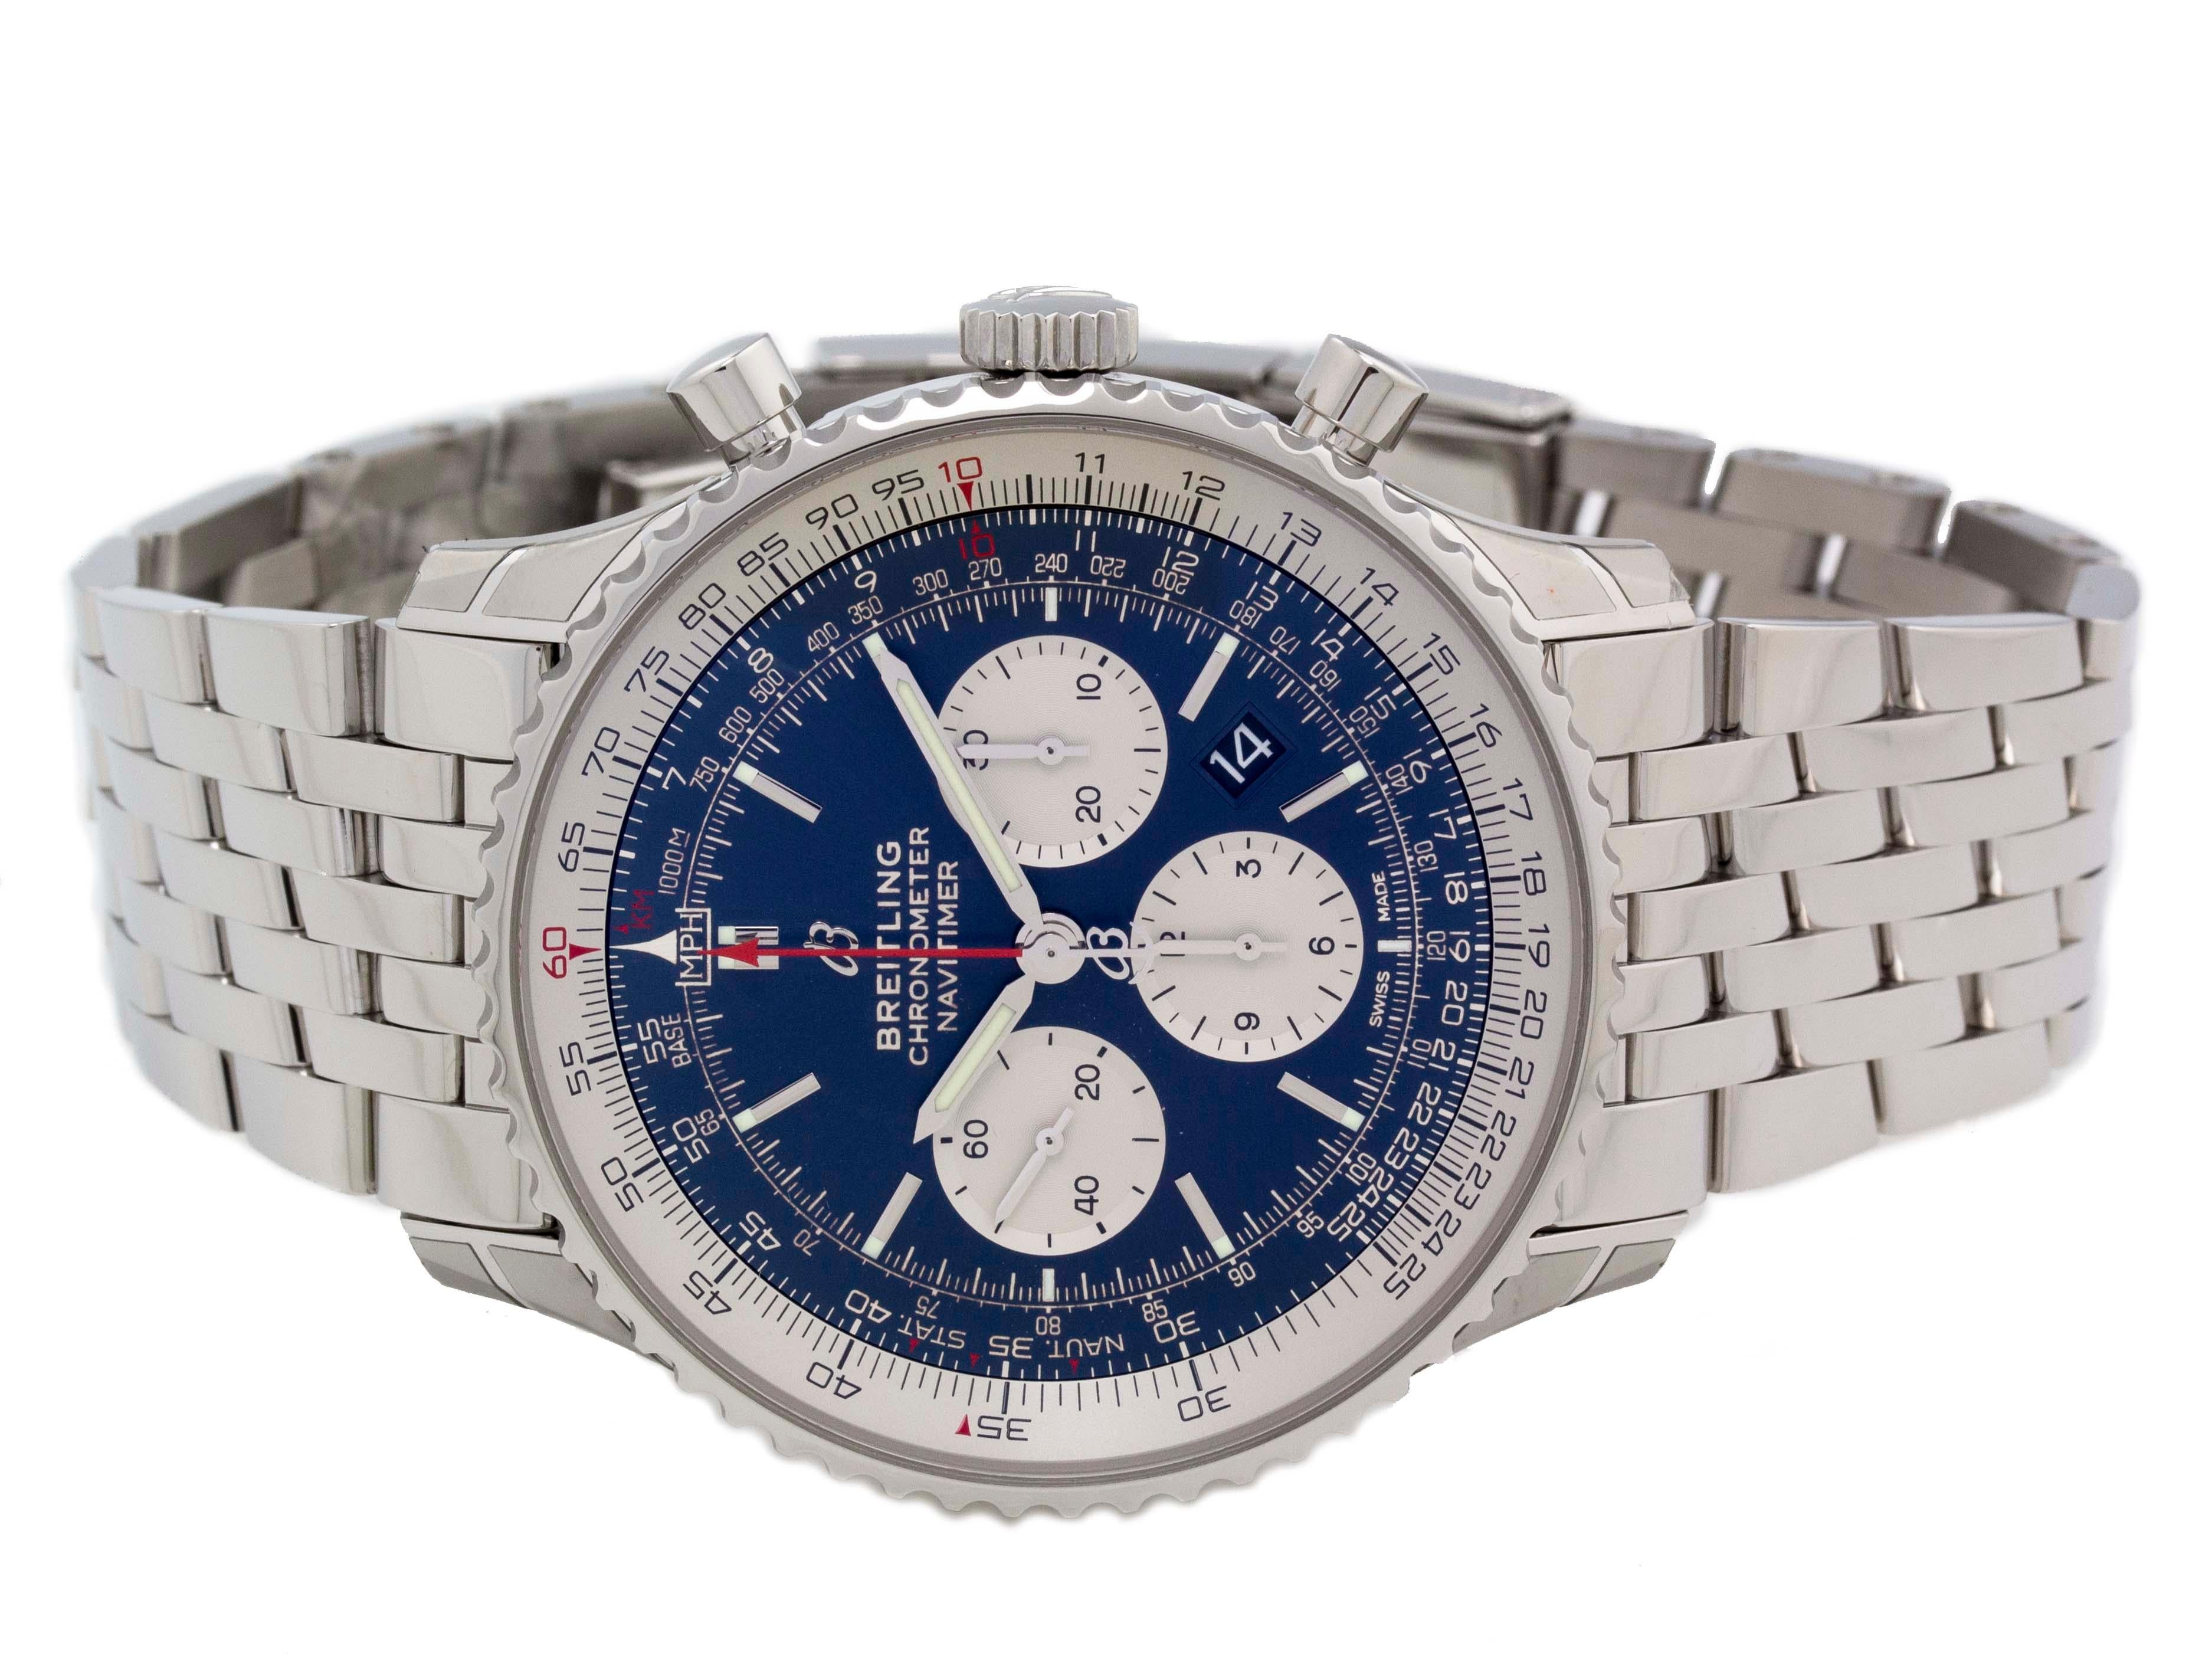 Brand	Breitling
Series	Navitimer 1
Model	AB0127211/C1A1
Gender	Men's
Condition	Excellent Display Model
Material	Stainless Steel
Finish	Polished
Caseback	Solid
Diameter	46mm
Thickness	14.51mm
Crystal	Sapphire Scratch Resistant
Crown	Screw